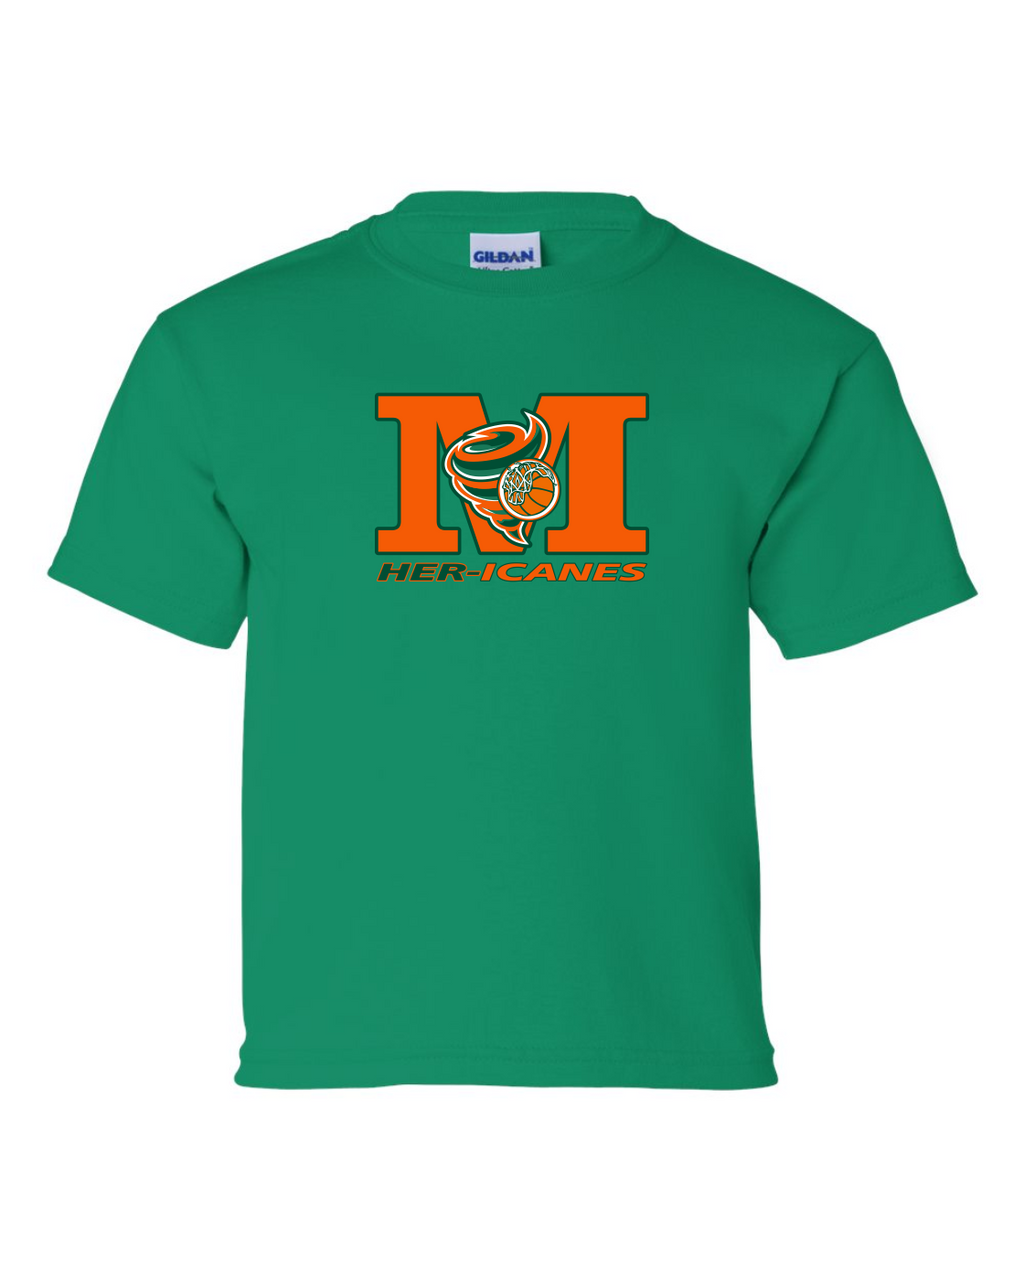 Miramichi Her-icanes - Green Cotton T-shirt - Youth